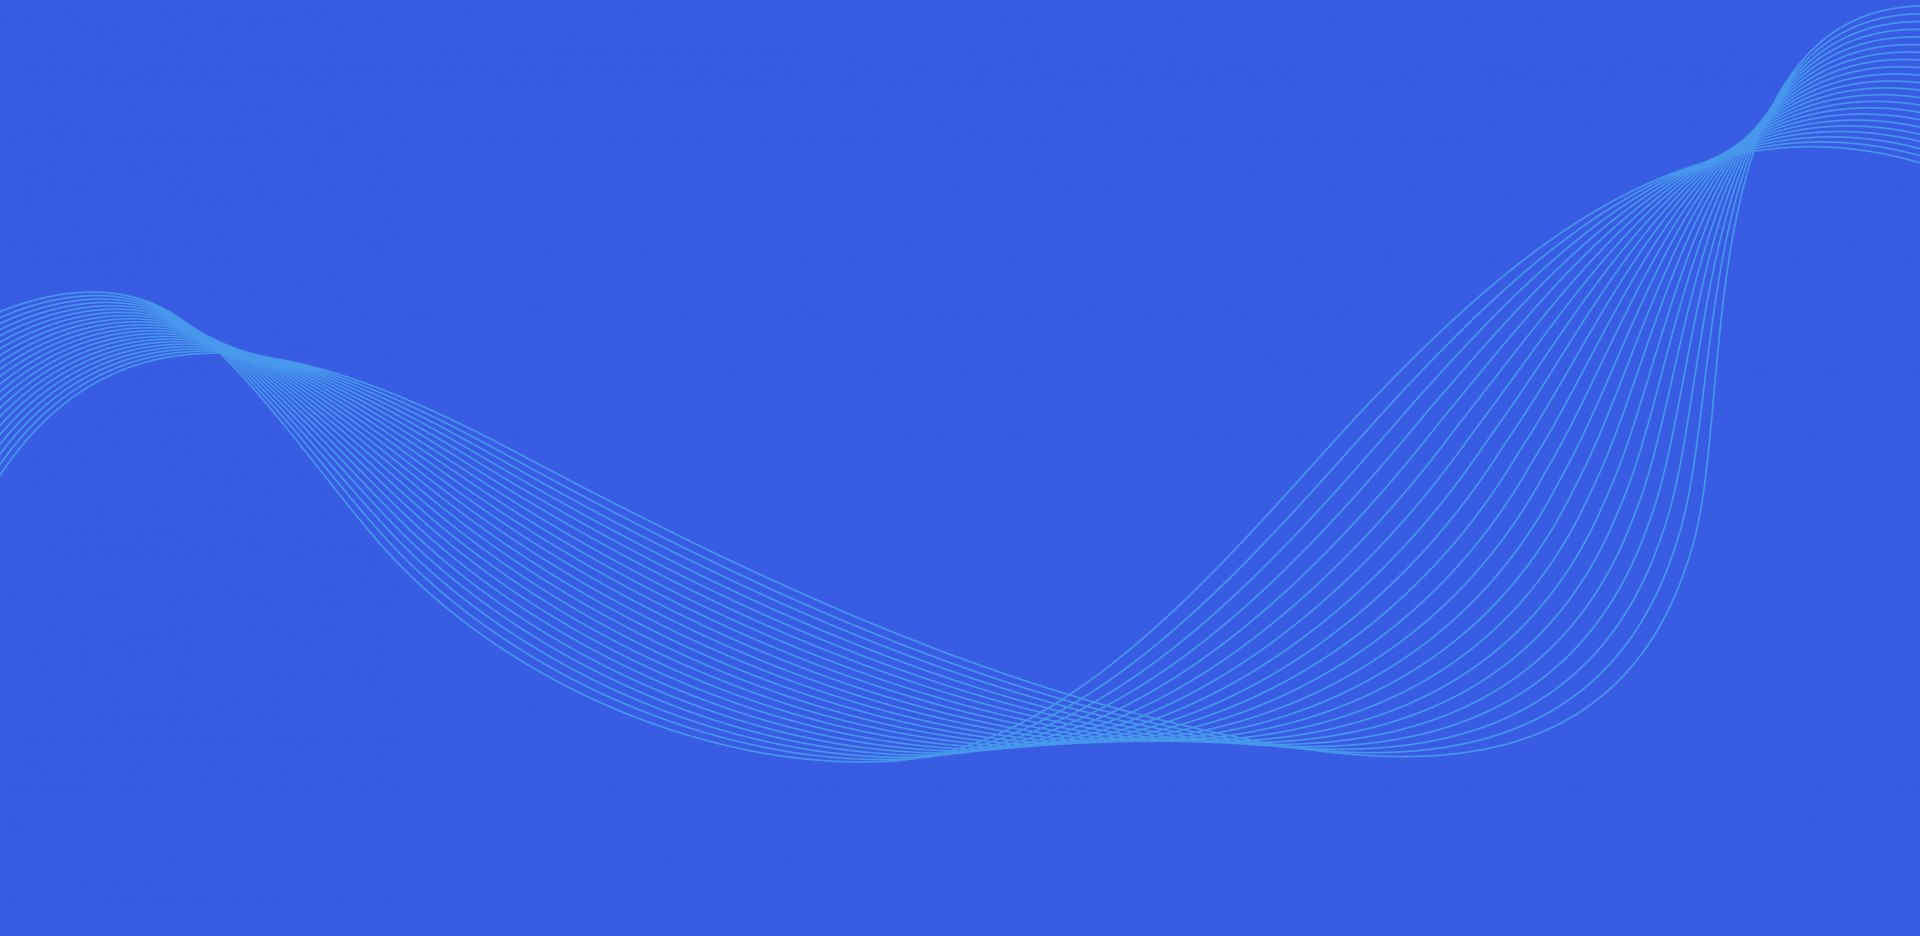 Abstract Wavy Lines Blue